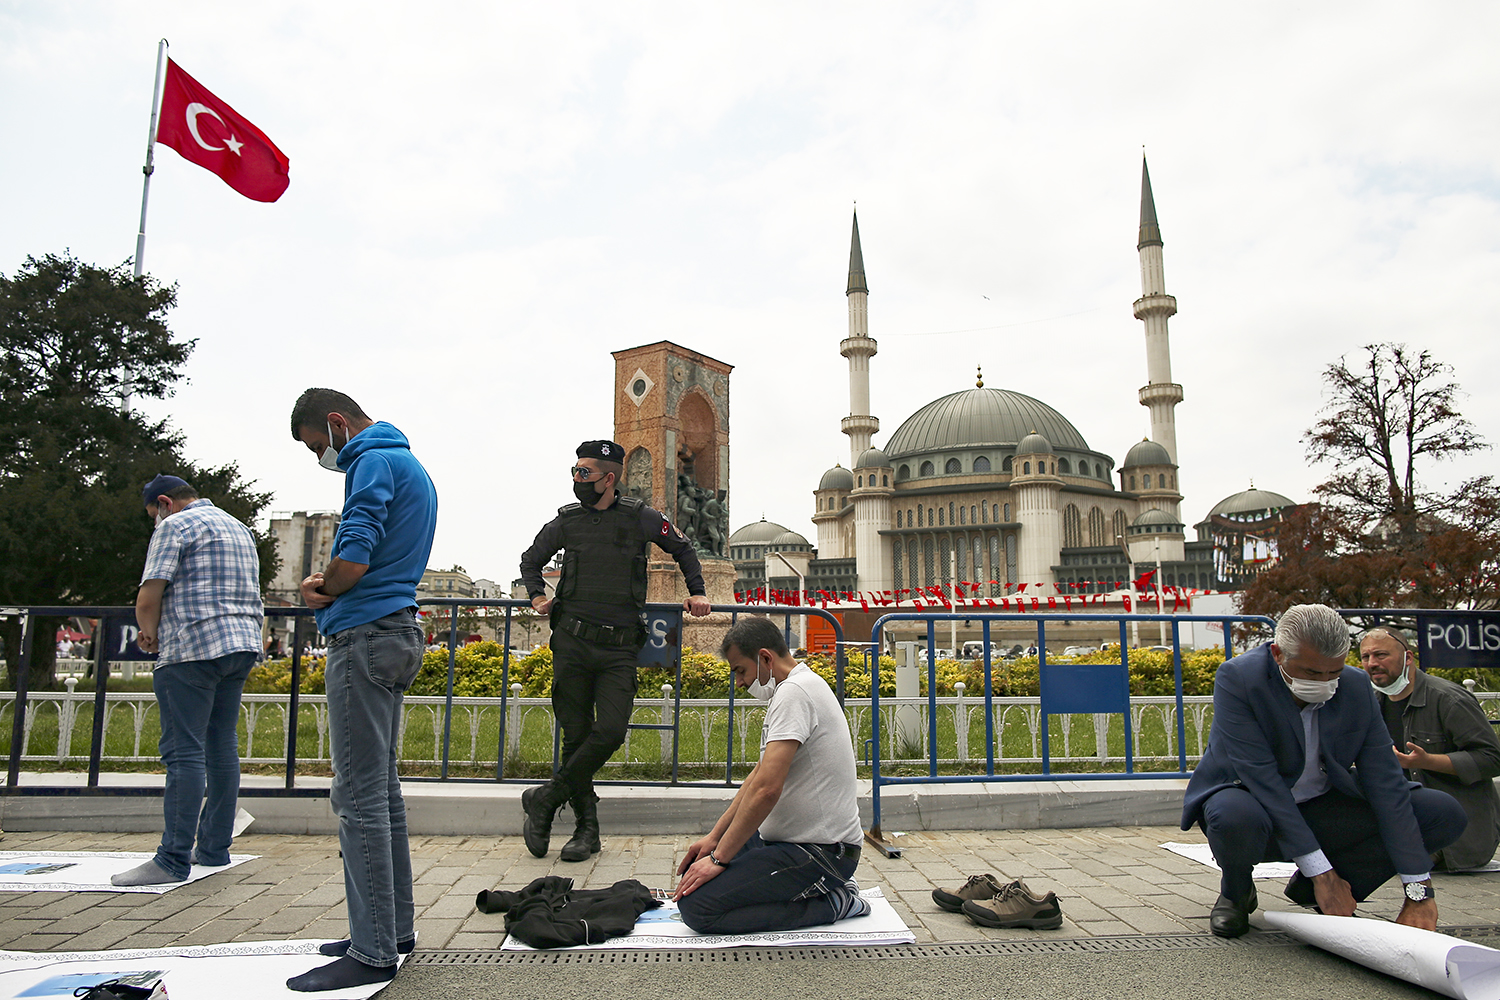 People pray outside the newly built Taksim Mosque at the Taksim Square in Istanbul, Friday, May 28, 2021. Turkish President Recep Tayyip Erdogan inaugurated landmark mosque in Istanbul's Taksim Square, fulfilling a long-time ambition to build a Muslim house of worship at the city's main public space that has become an emblem of the modern Turkish Republic. (AP Photo/Emrah Gurel)